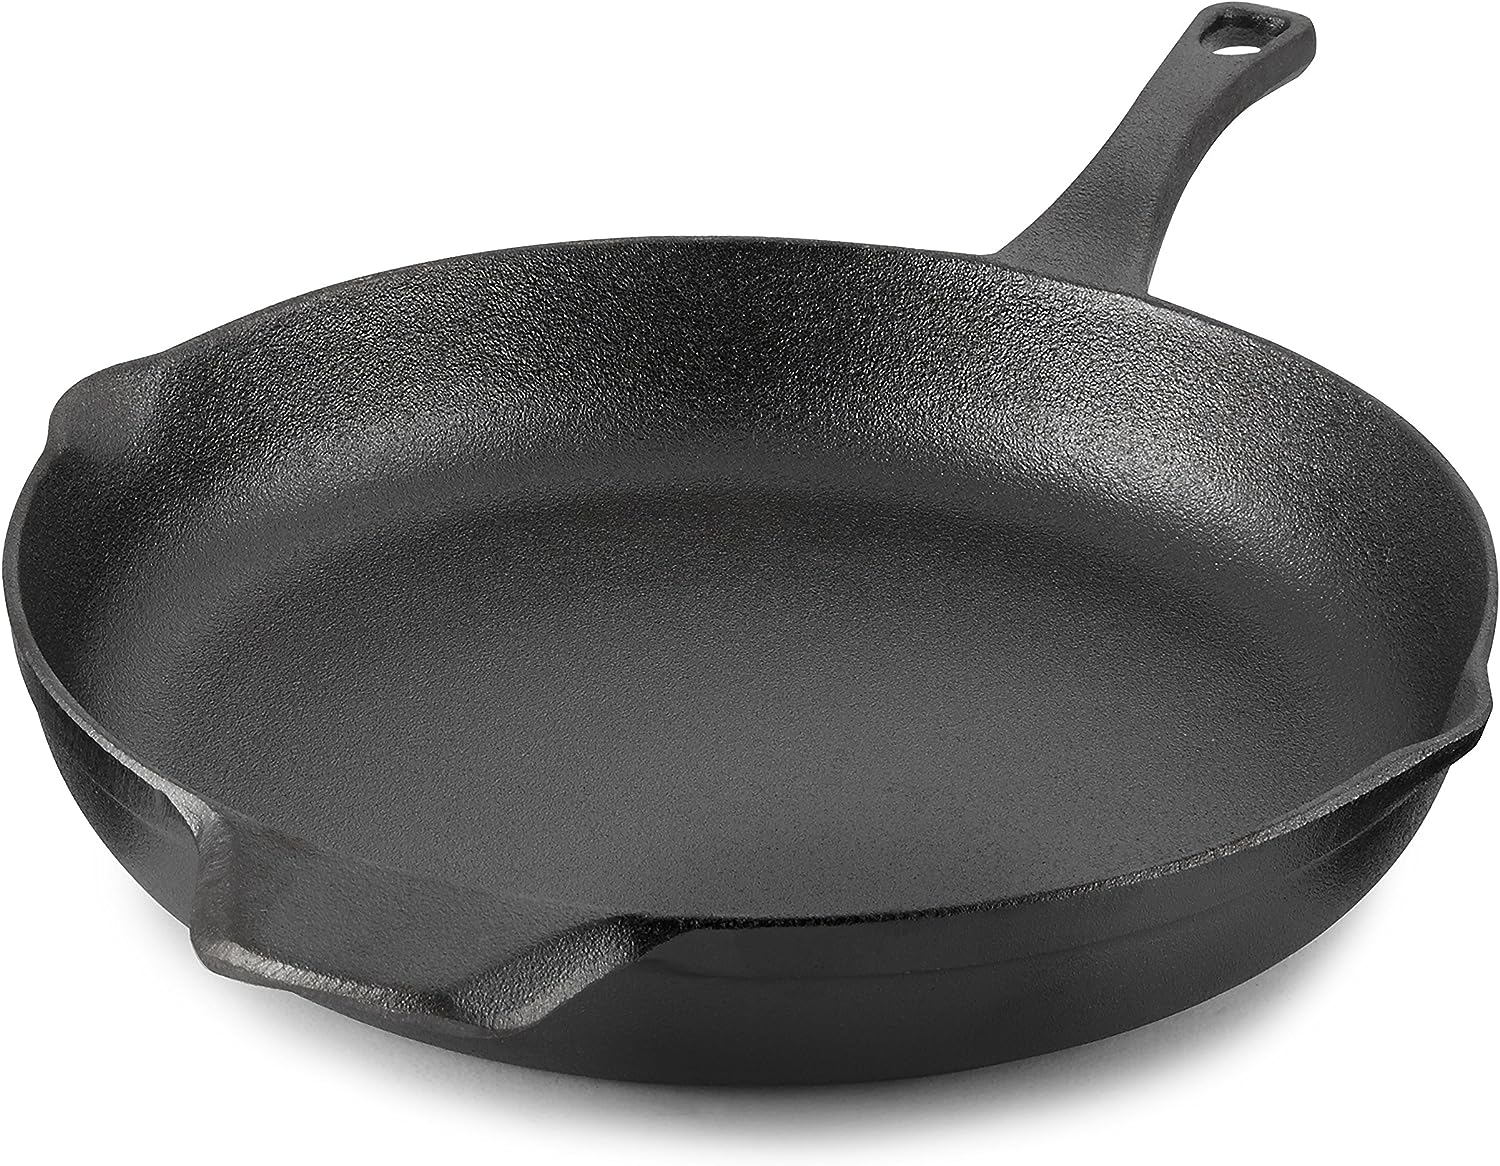 https://bigbigmart.com/wp-content/uploads/2023/09/Calphalon-Cast-Iron-Skillet-Pre-Seasoned-Cookware-with-Large-Handles-and-Pour-Spouts-12-Inch-Black1.jpg